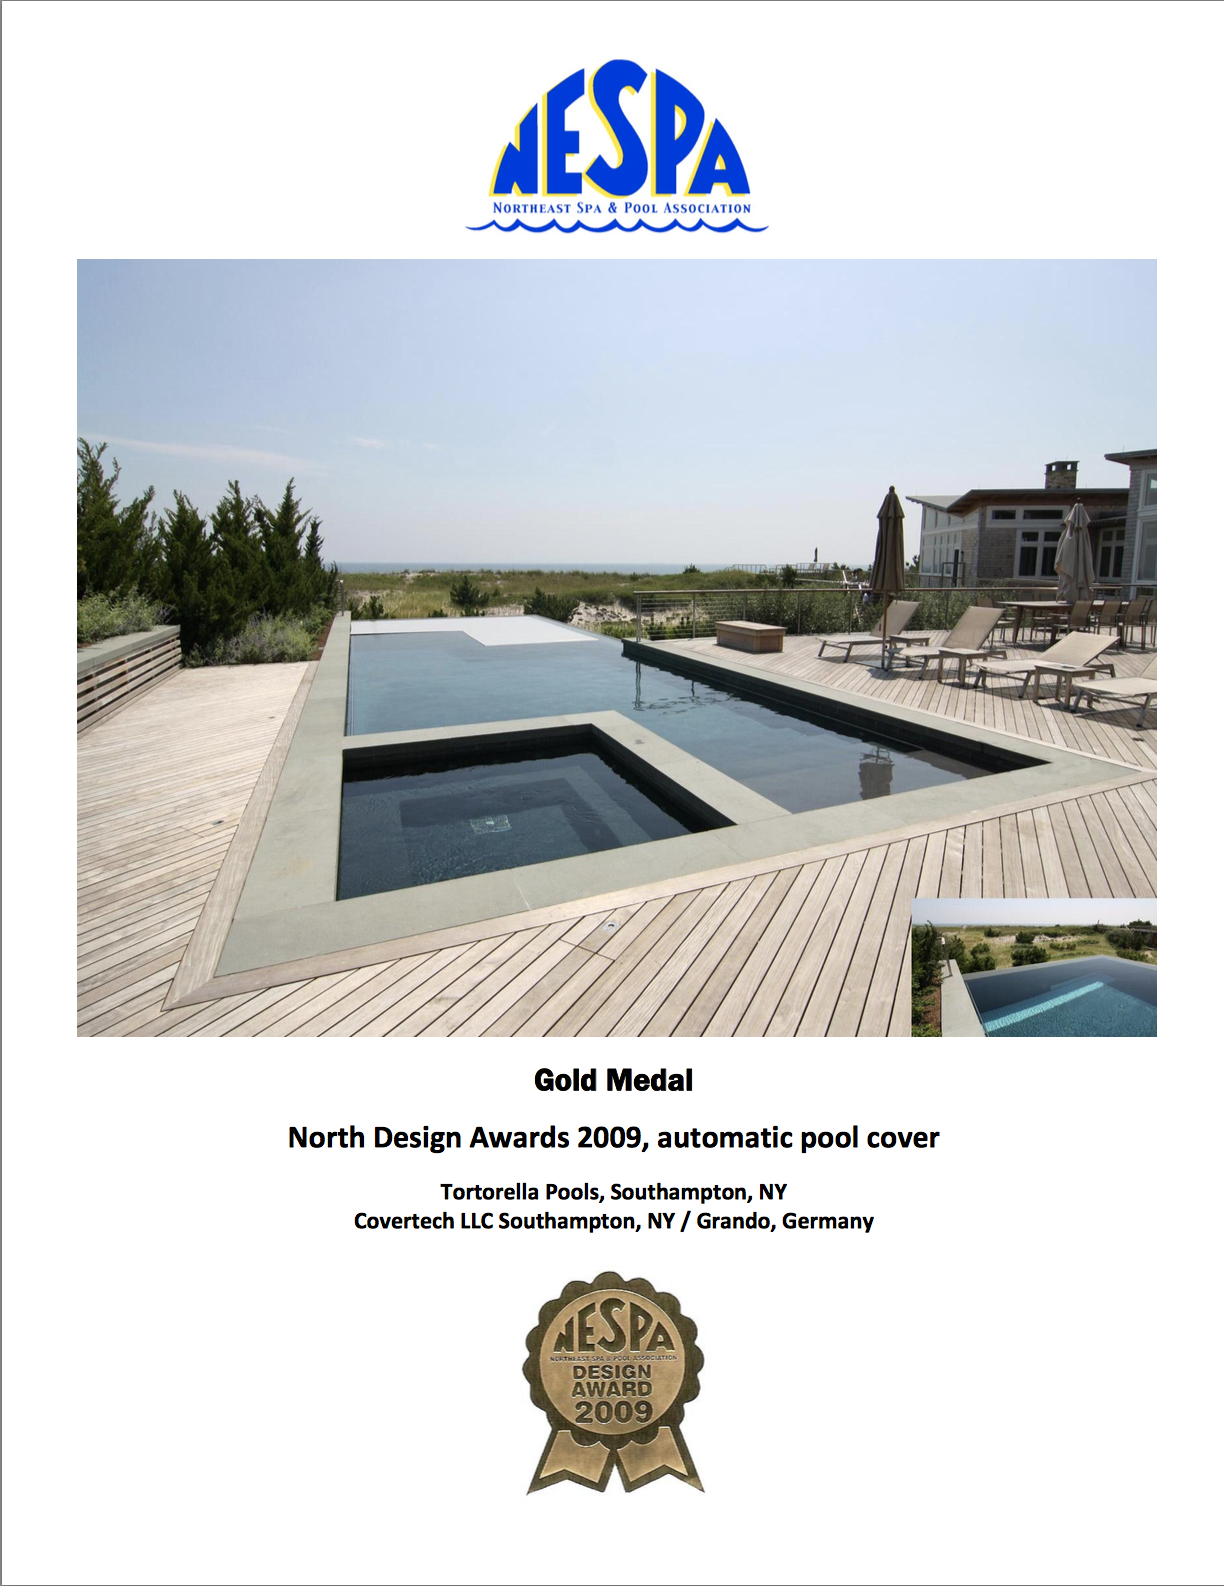 Covertech_GOLD_NESPA_Award_Res_Pools_with_automatic_pool_cover